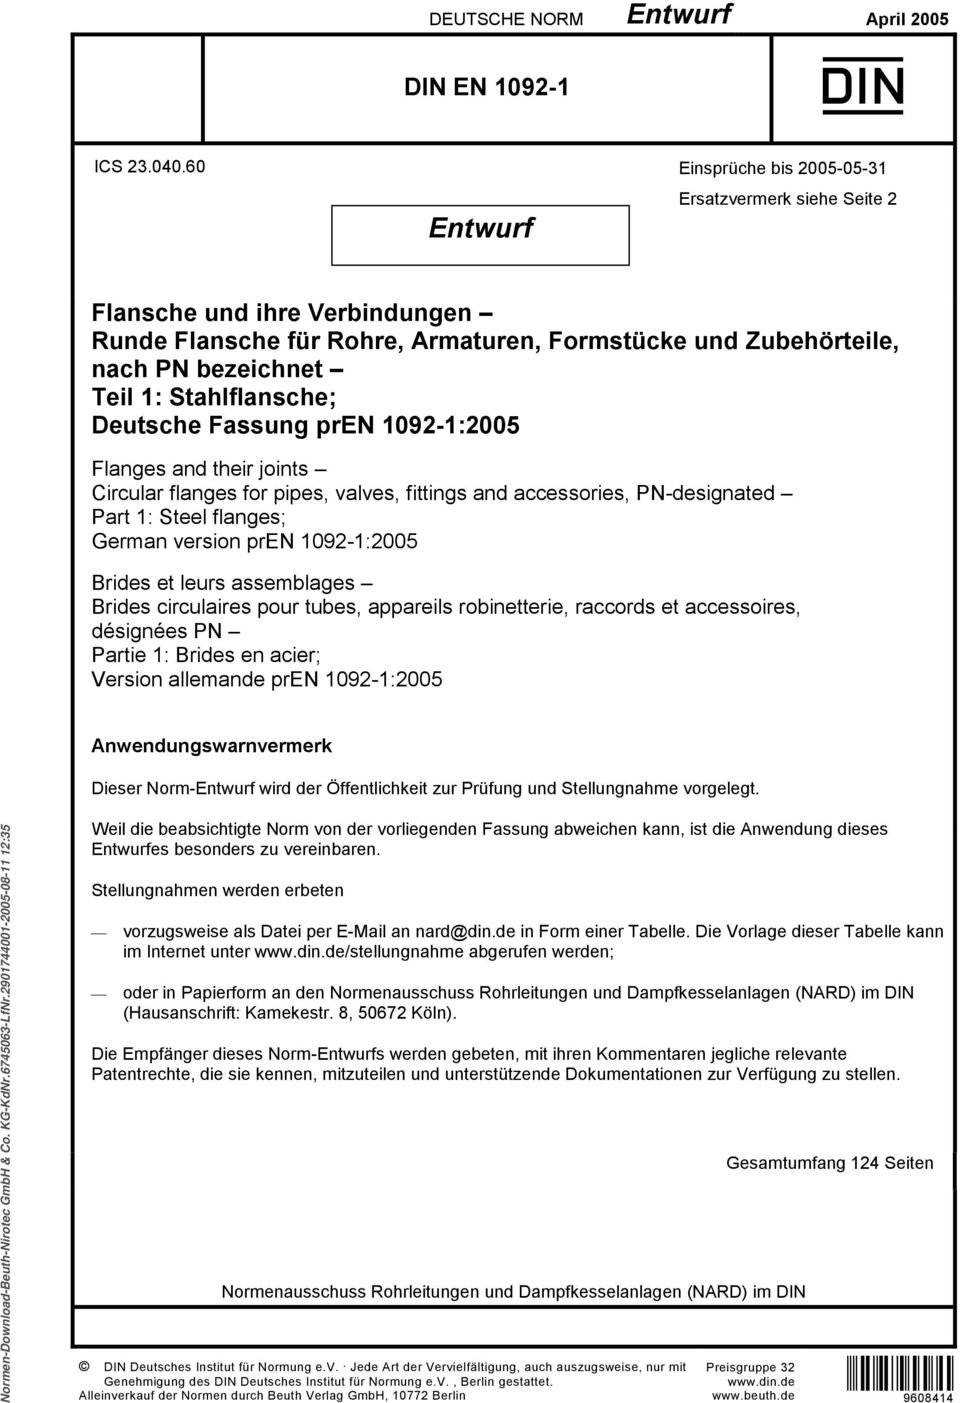 Stahlflansche; Deutsche Fassung pren 1092-1:2005 Flanges and their joints Circular flanges for pipes, valves, fittings and accessories, PN-designated Part 1: Steel flanges; German version pren